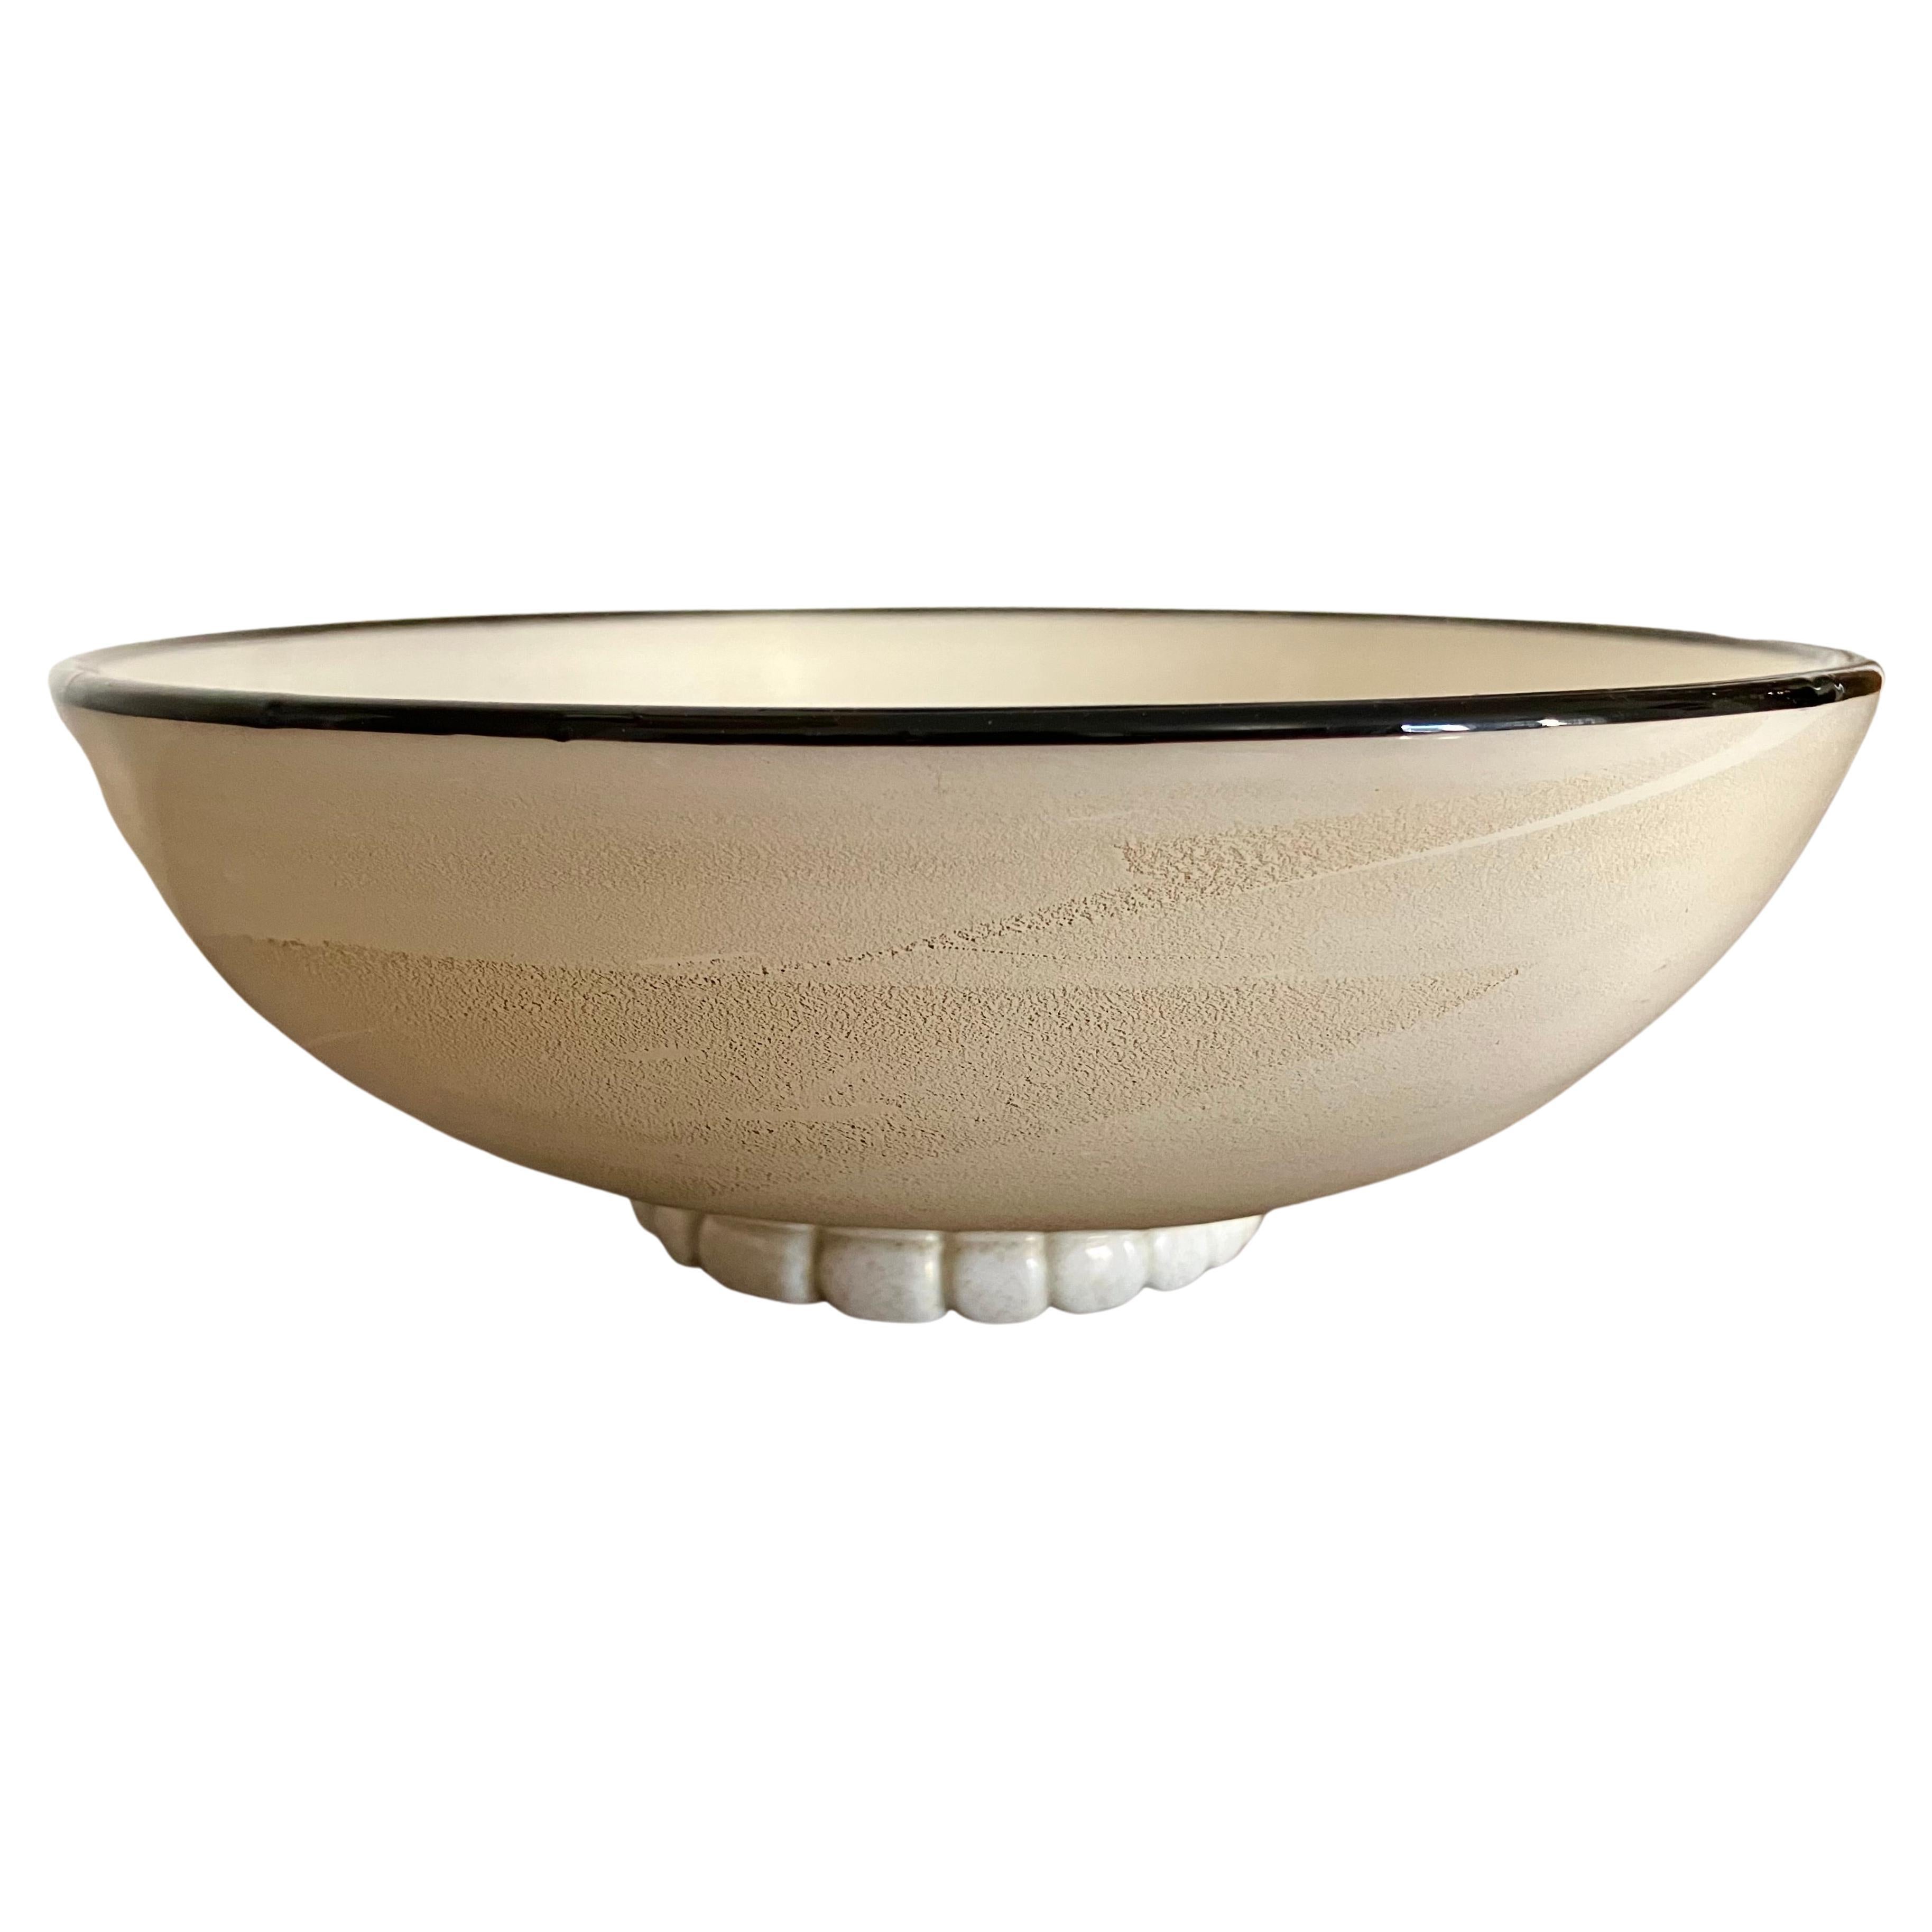 Wonderful, elegant center bowl in gold flecked milky white Aventurina glass with black pasta di vetro piping around the rim, sitting on a sculpted round foot. 

In 1933, around the time this piece was made, Pauly et Cie merged with MVM Cappellin,